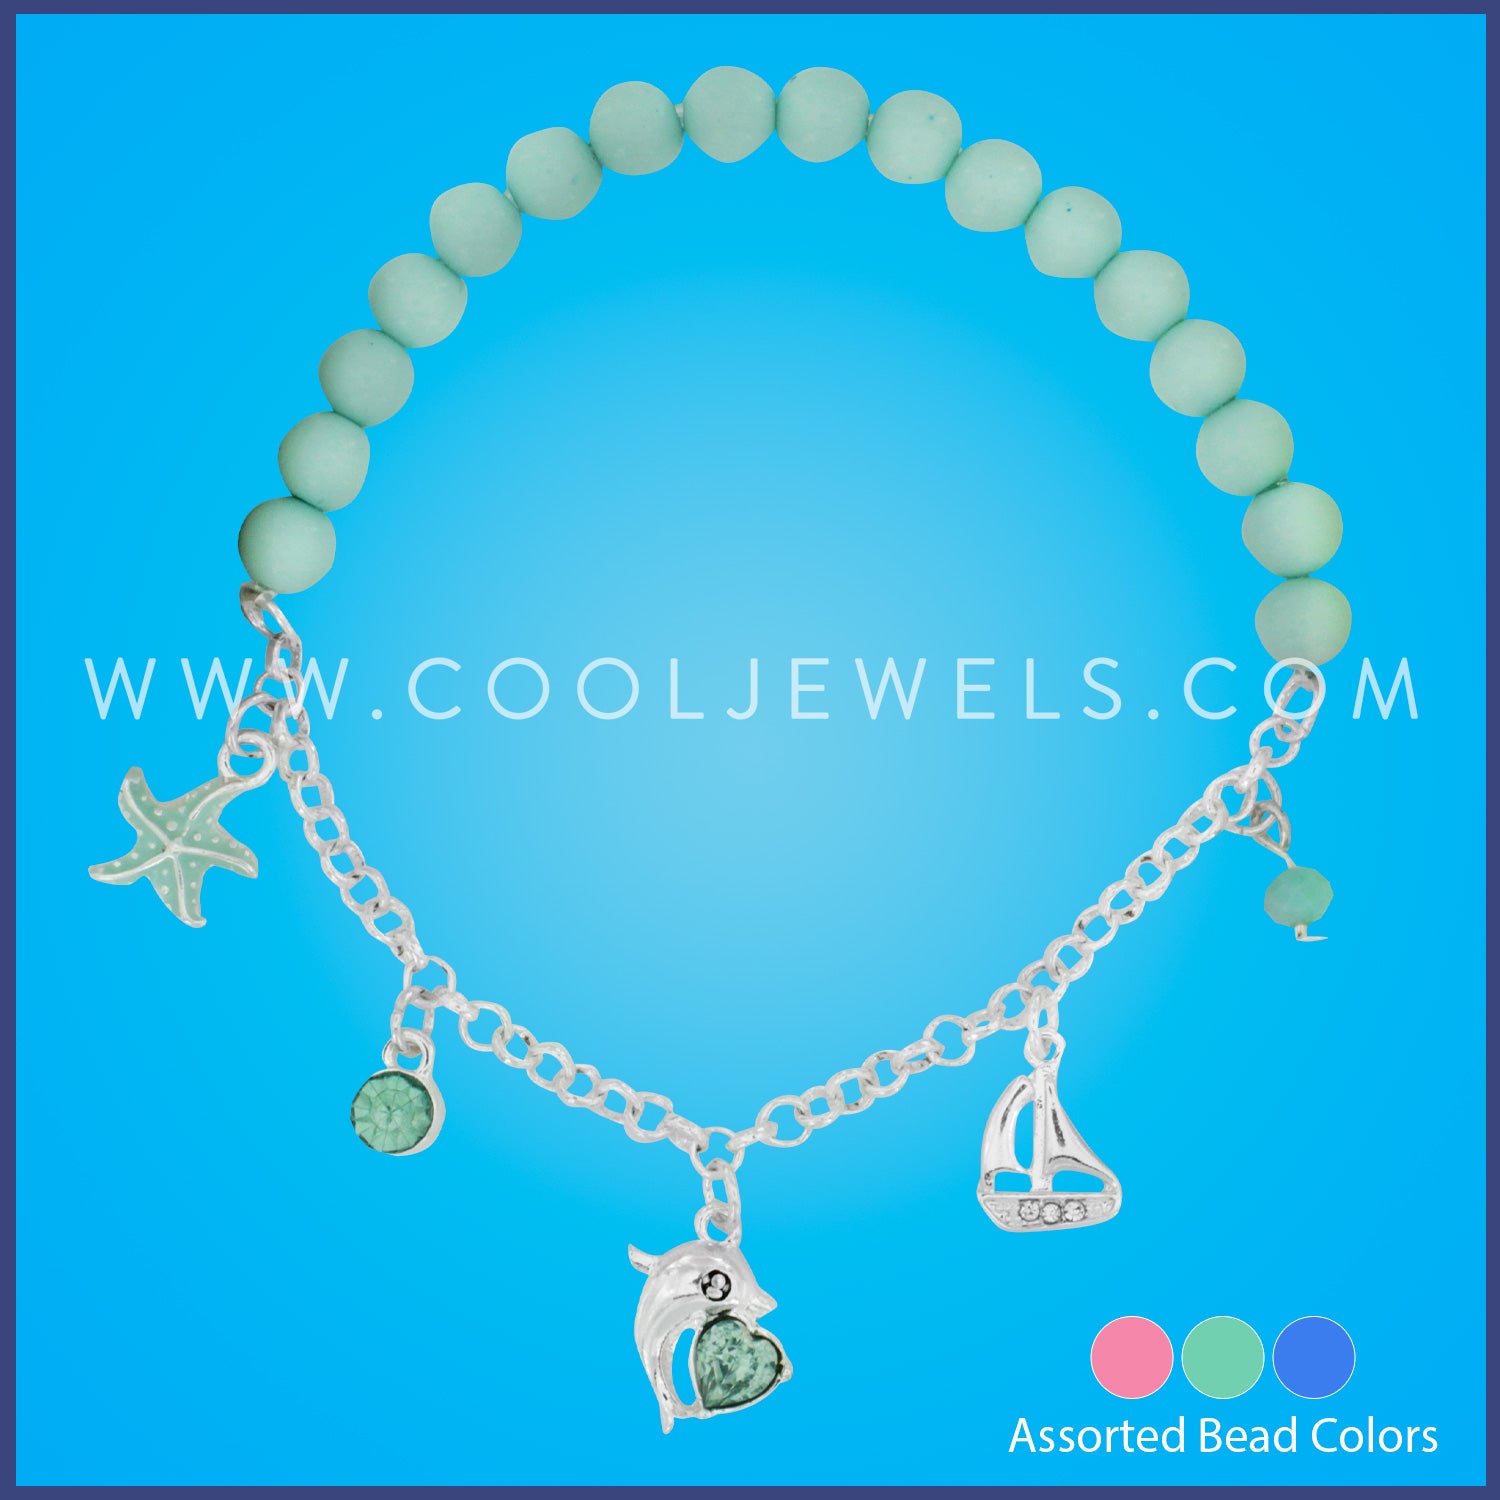 BEADED STRETCH & CHAIN BRACELET WITH SEALIFE CHARMS - ASSORTED